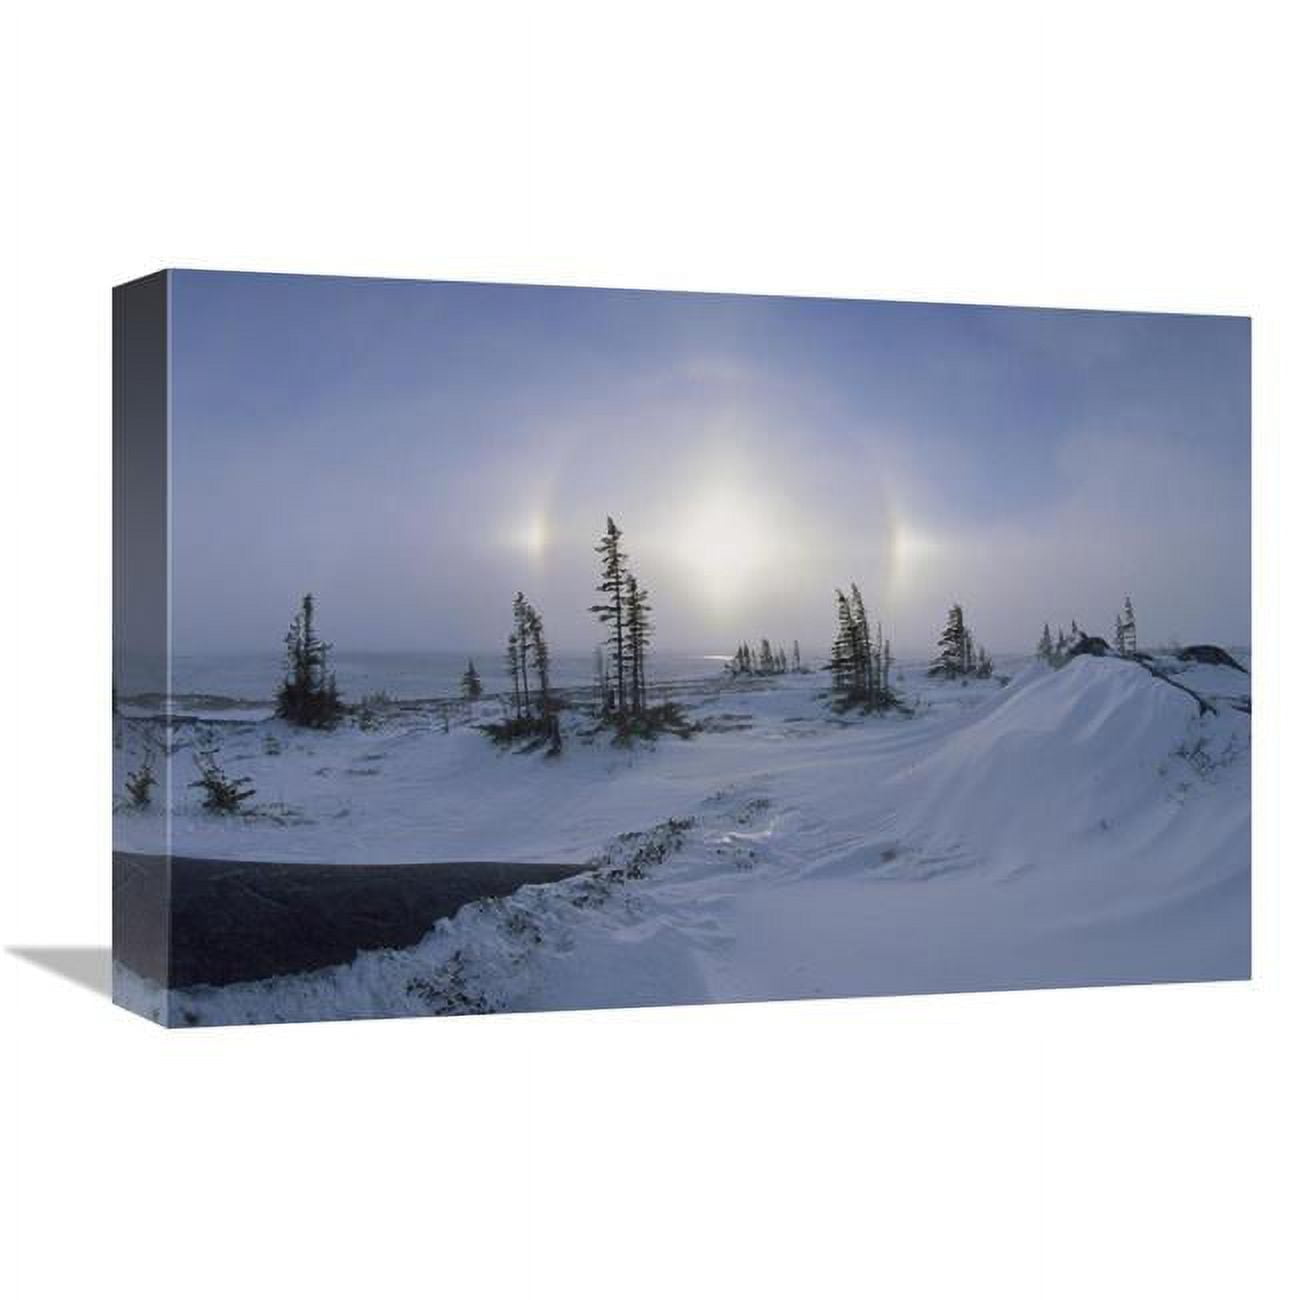 JensenDistributionServices 12 x 18 in. Spruce Forest in Snow with Sundogs, Hudson Bay, Canada Art Print - Konrad Wothe